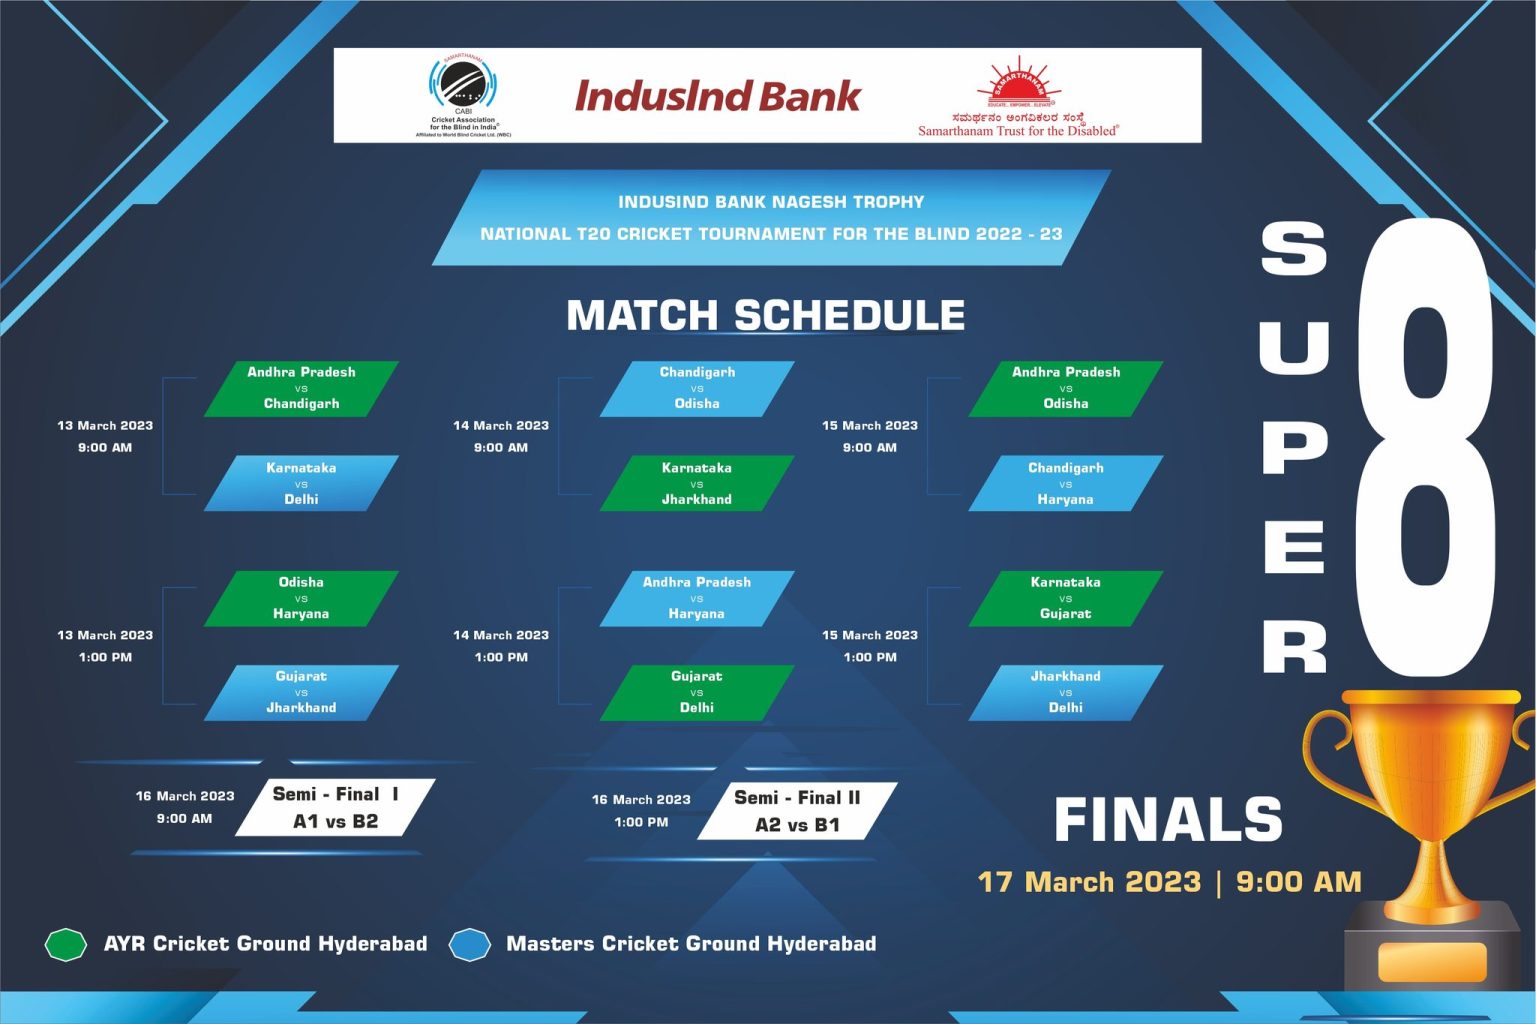 Super 8 match schedule of IndusInd Bank Nagesh Trophy National T20 Cricket Tournament for the Blind 2022-23!